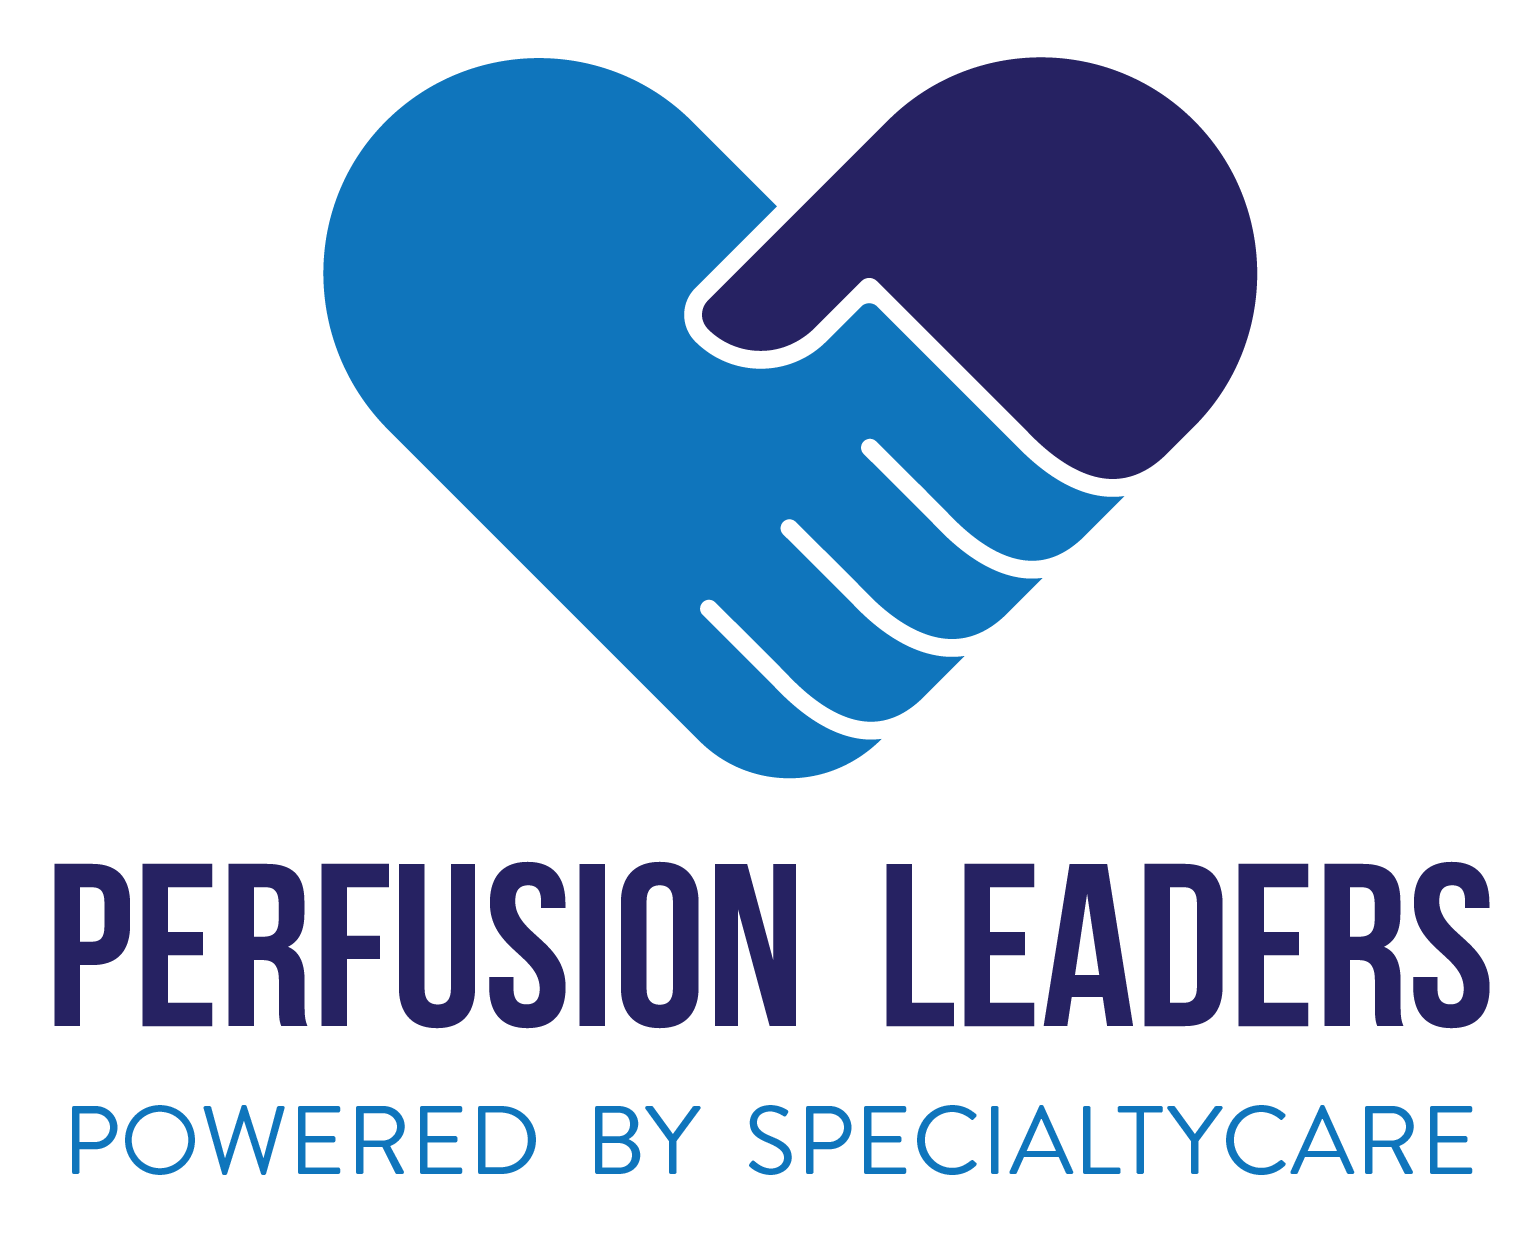 Perfusion Leaders